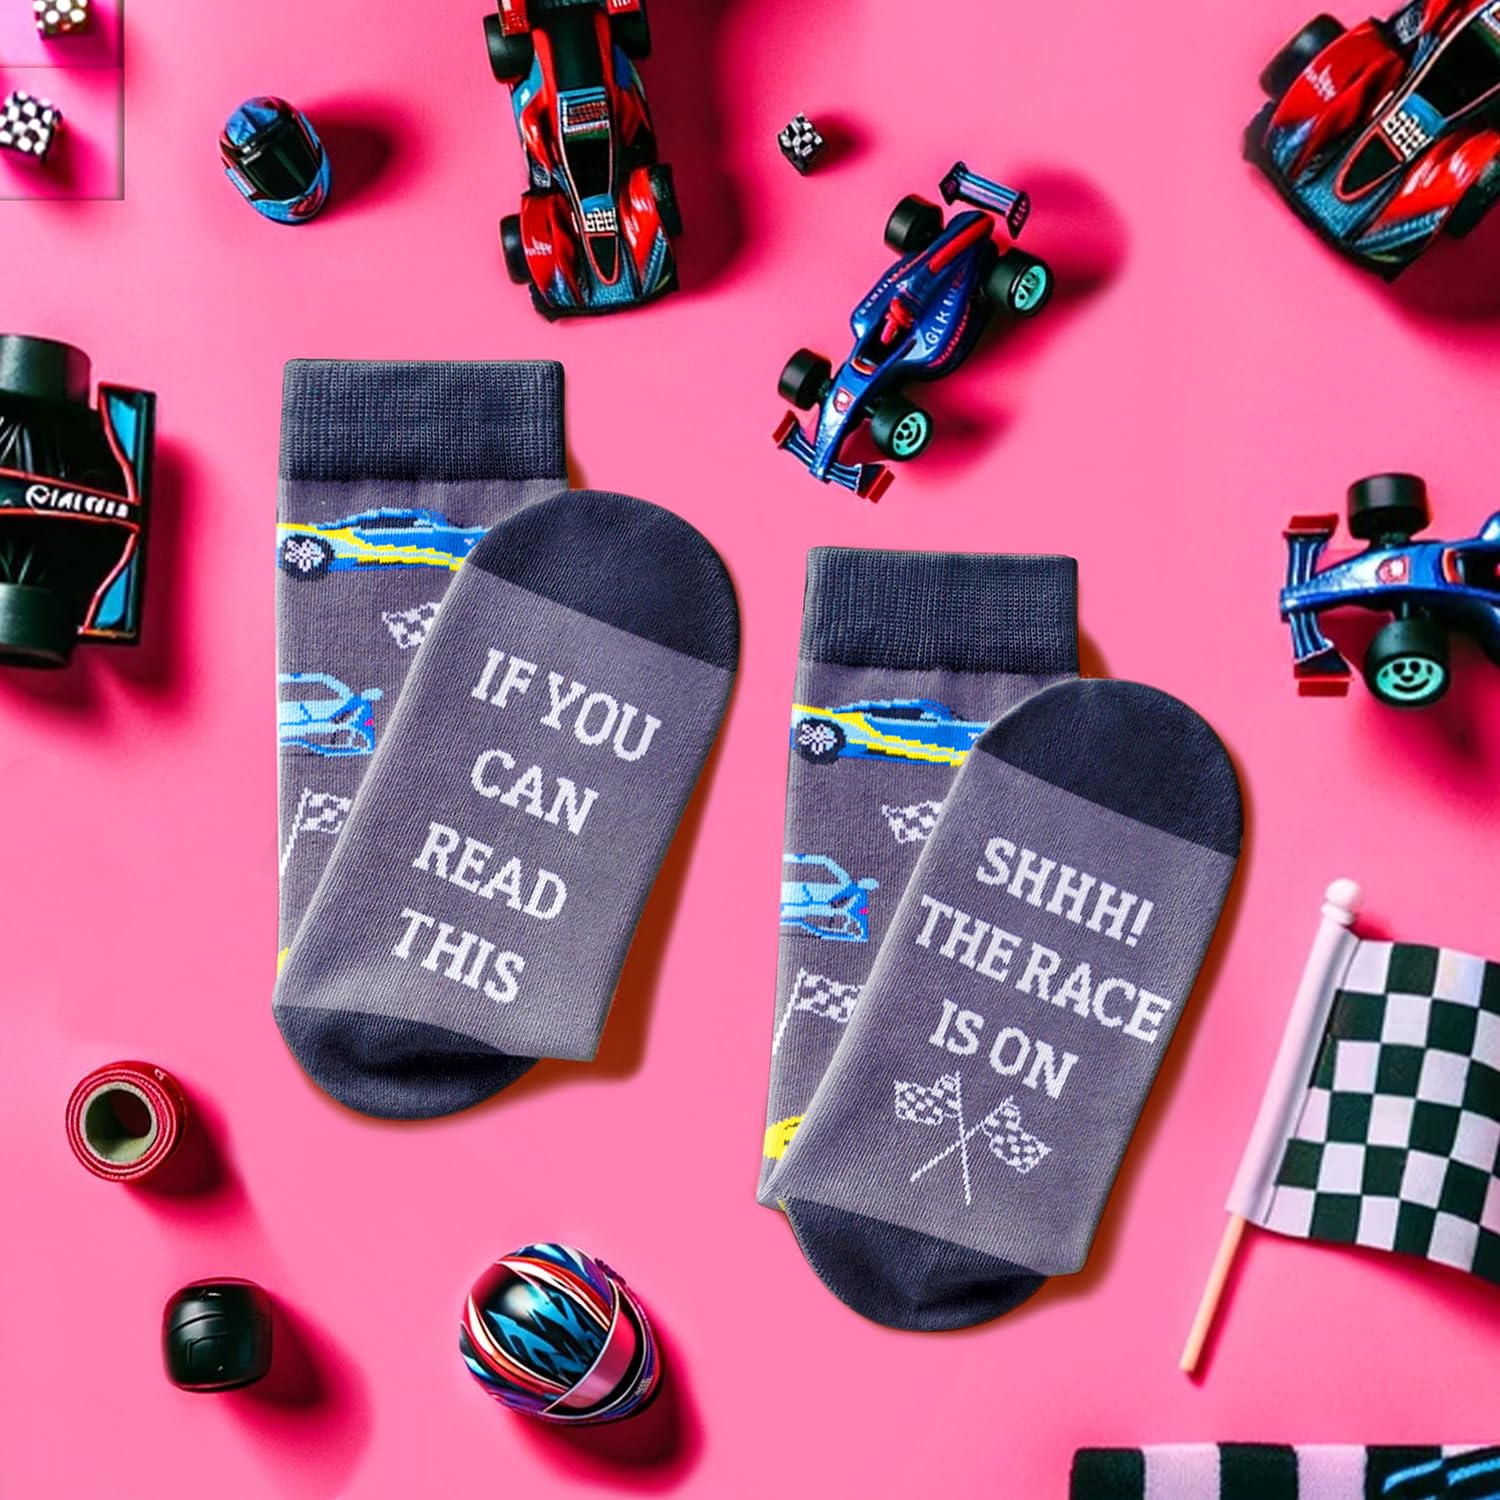 Zmart Car Guy Gifts, Funny Gifts For Car Lovers, Racing Car Gifts For Men, Drag Racing Gifts For Men, Cool Vintage Race Car Socks